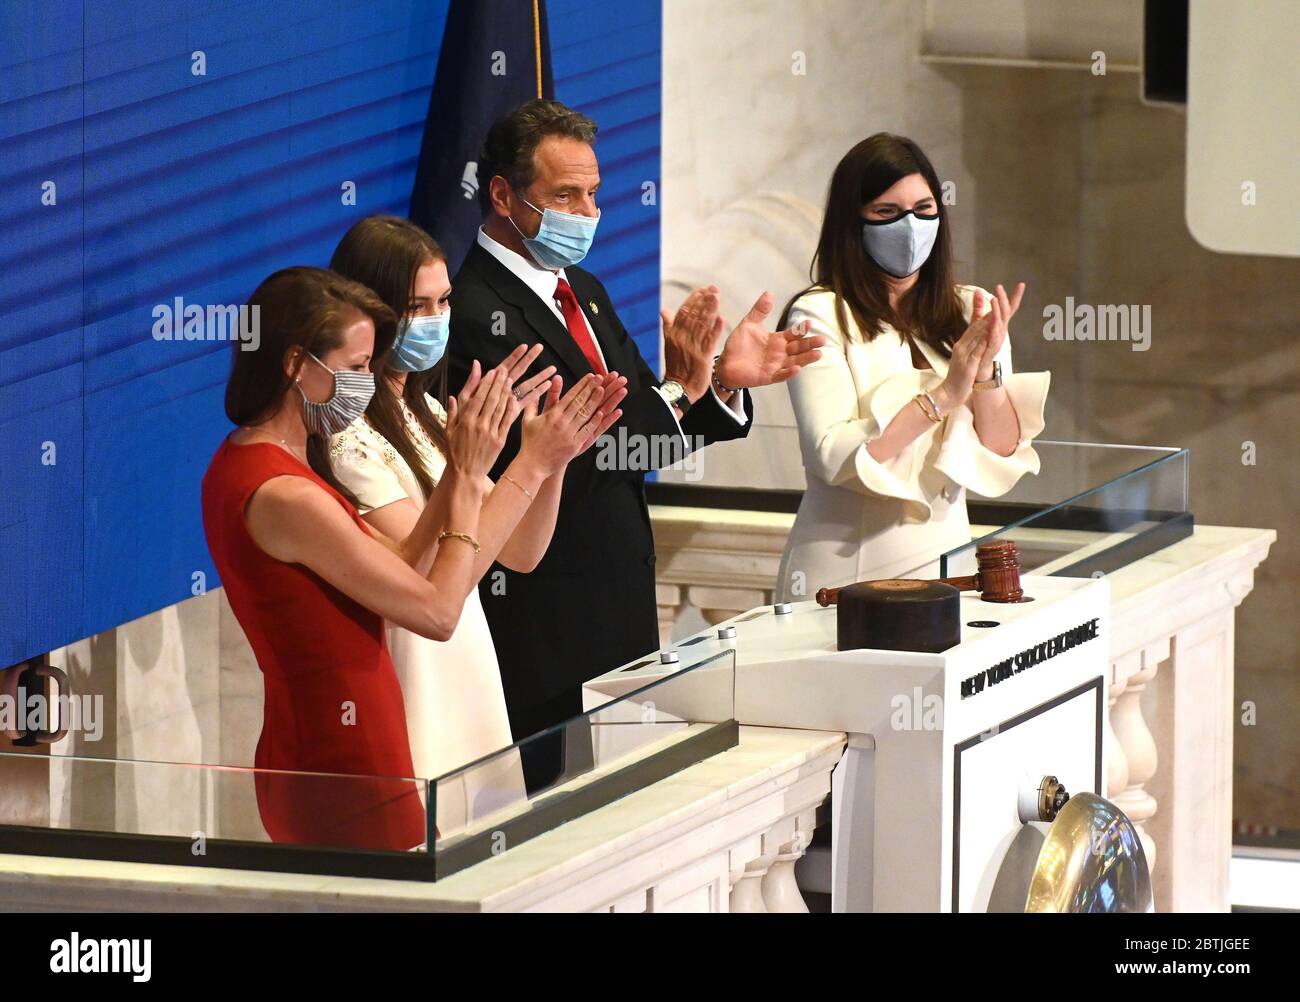 New York, United States. 26th May, 2020. Governor Andrew M. Cuomo rings the opening bell at the New York Stock Exchange with NYSE President Stacey Cunningham when the NYSE reopens after after being closed for 2 months on Wall Street in New York City on Tuesday, May 26, 2020. The floor of the NYSE had been closed to traders since March 23, 2020 due to the Coronavirus Pandemic. Photo by Kevin P. Coughlin/Office of Governor Andrew M. Cuomo Credit: UPI/Alamy Live News Stock Photo